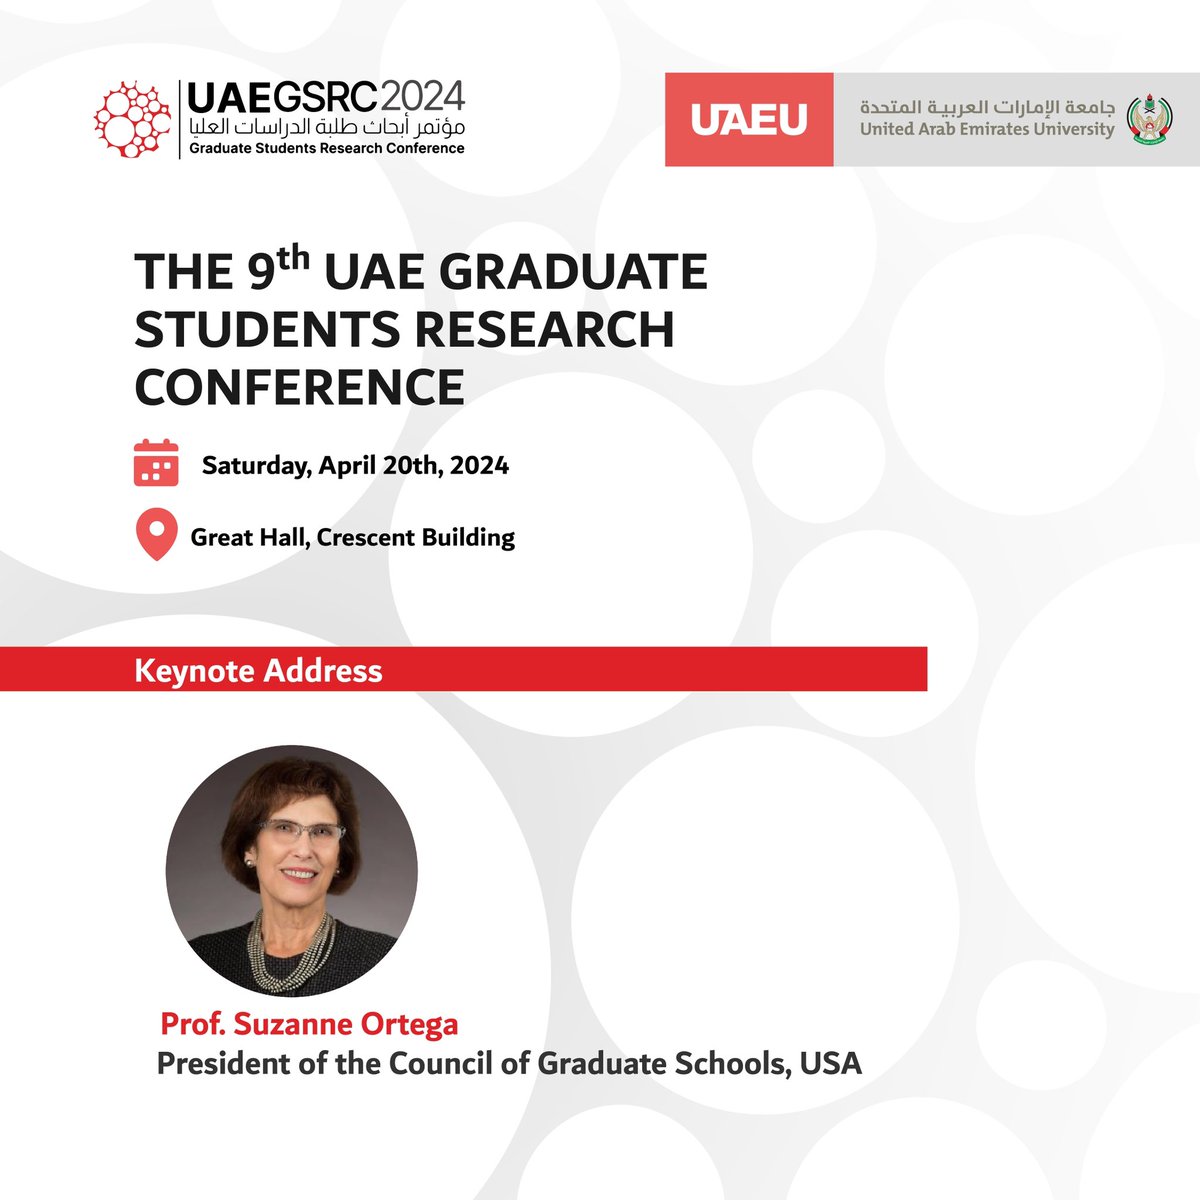 Unlocking Innovation: Insights from Prof. Suzanne Ortega, President of the Council of Graduate Schools, USA. 

Don’t miss her keynote address at the 9th UAE Graduate Students Research Conference, taking place on Saturday, April 20th, 2024, in the Great Hall of the Crescent